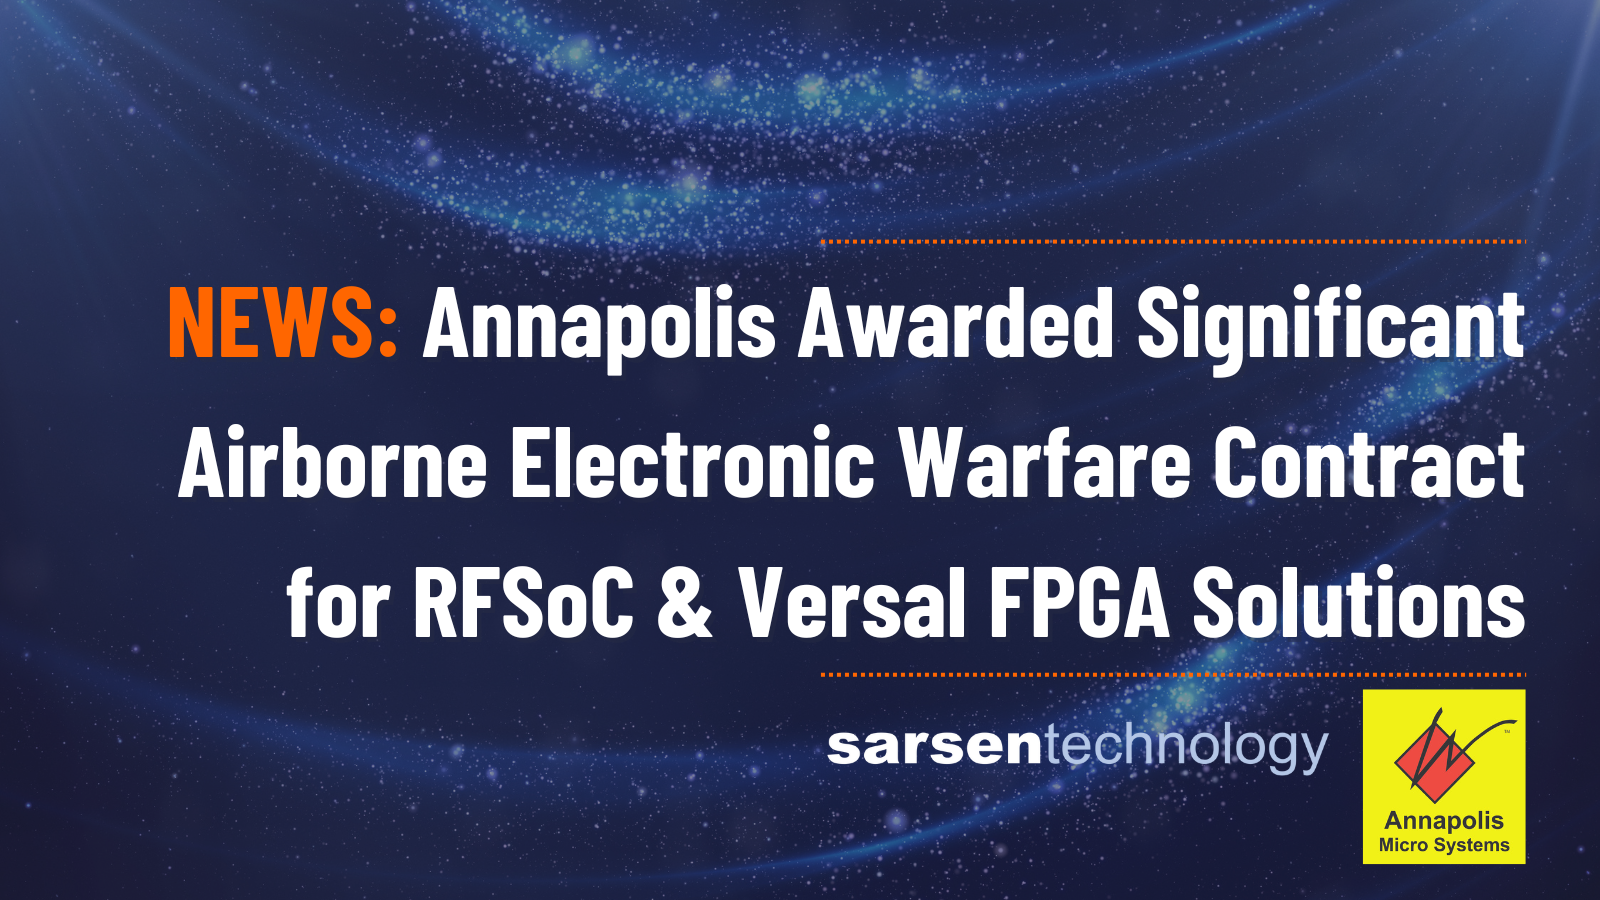 Annapolis Micro Systems Awarded Significant Airborne Electronic Warfare Contract for RFSoC & Versal FPGA Solutions